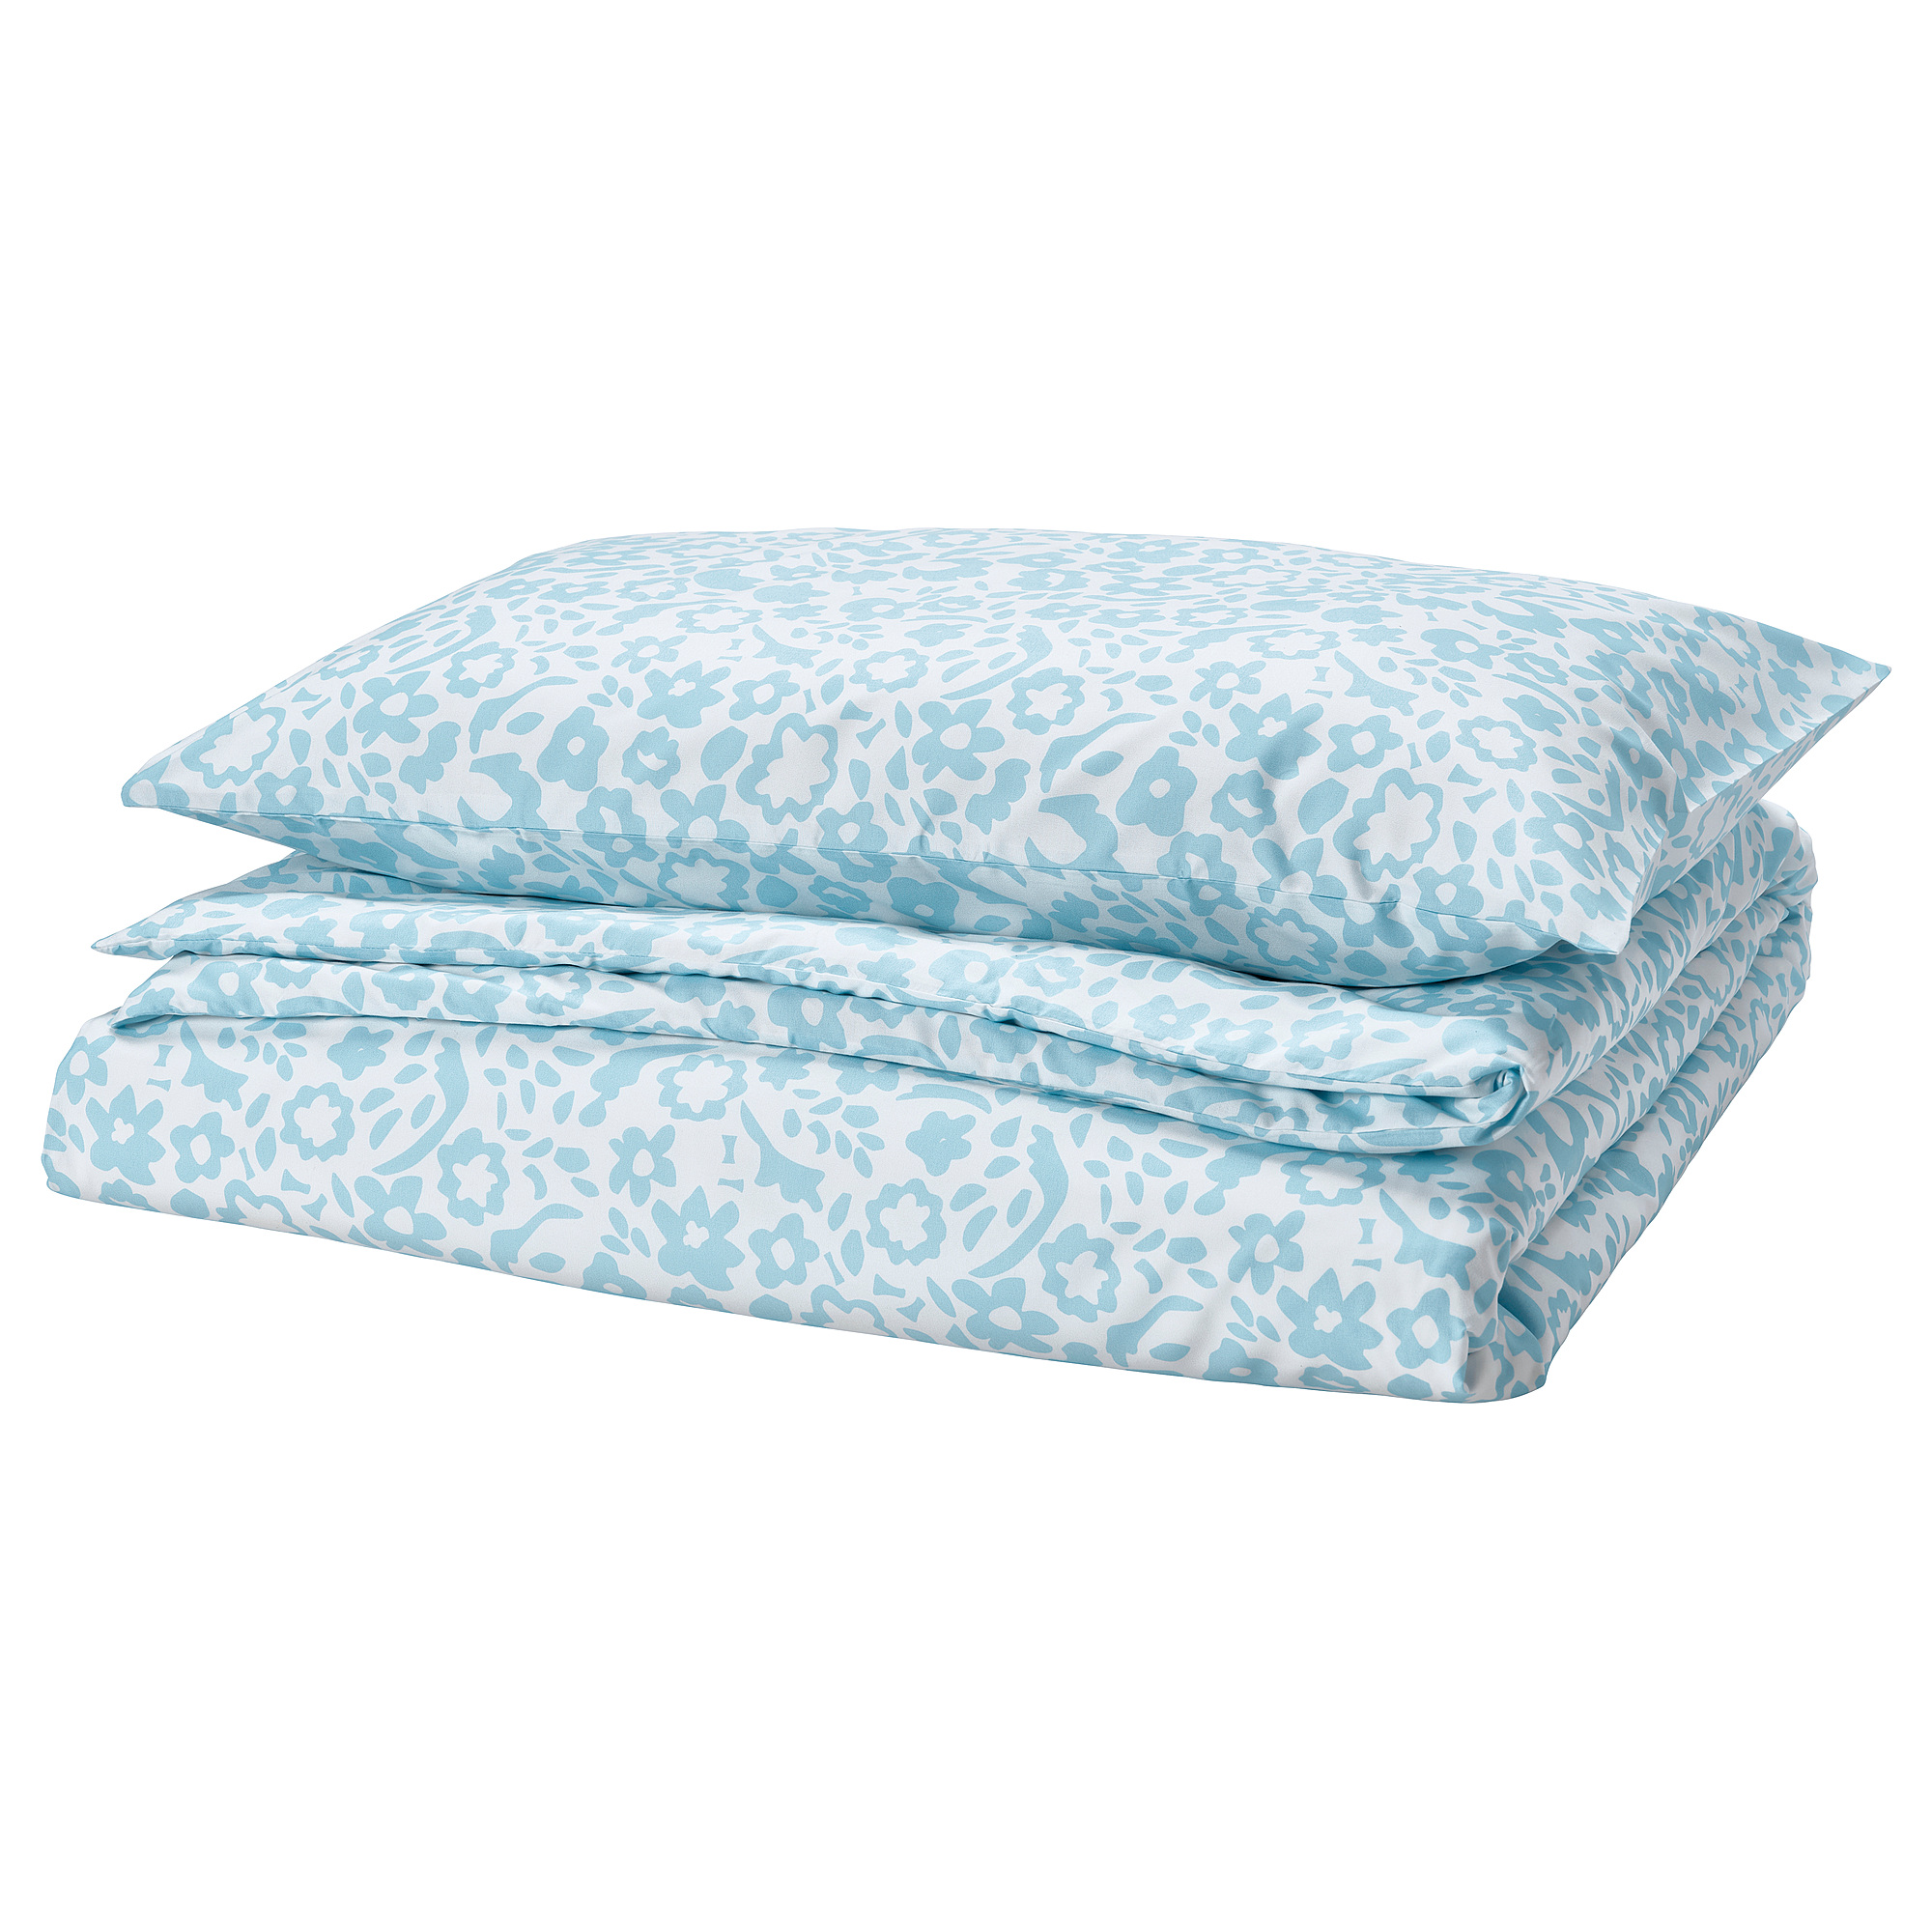 CYMBALBLOMMA duvet cover and pillowcase